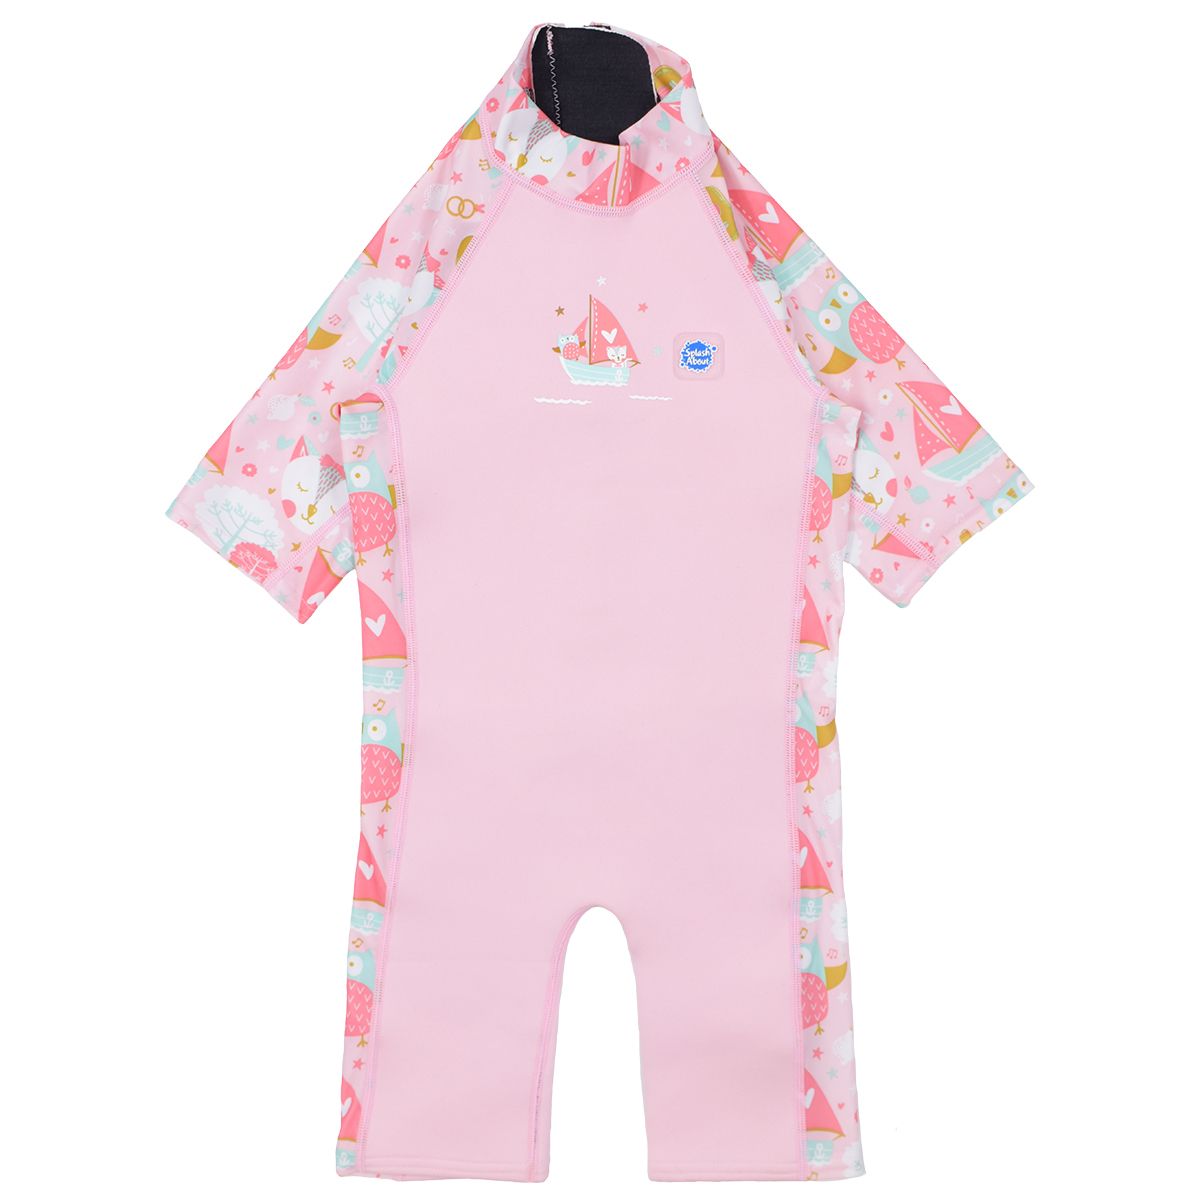 One piece UV sun and sea wetsuit for toddlers in baby pink. Cute kittens, owls, trees, guitars and seal boats print on sleeves, side panels, neck and chest. Front.